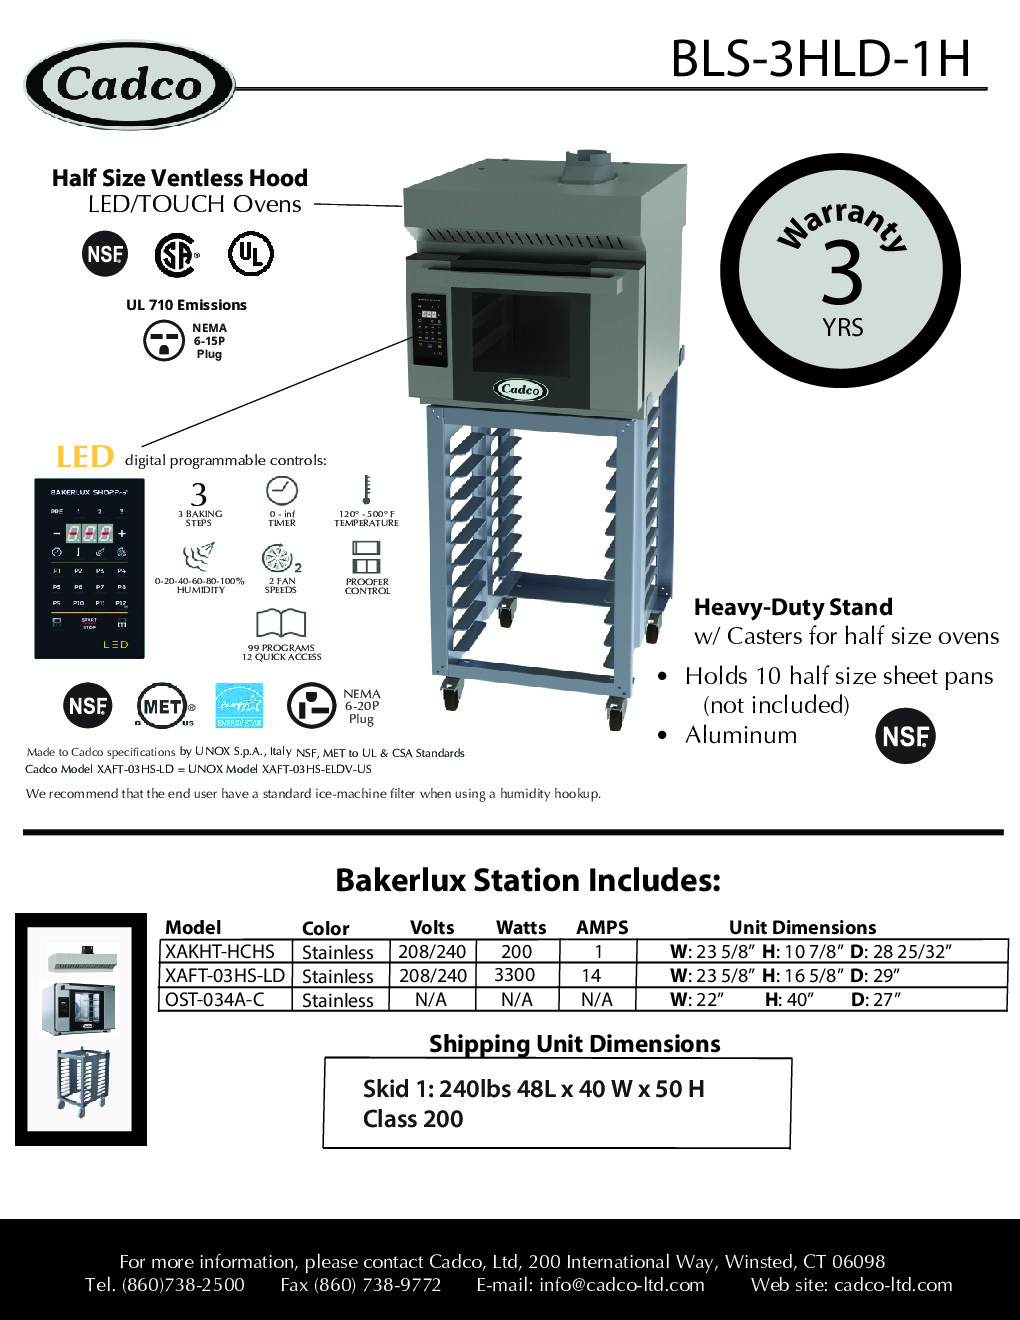 Cadco BLS-3HLD-1H Single-Deck Electric Convection Oven w/ Digital Touch Controls, Half-Size